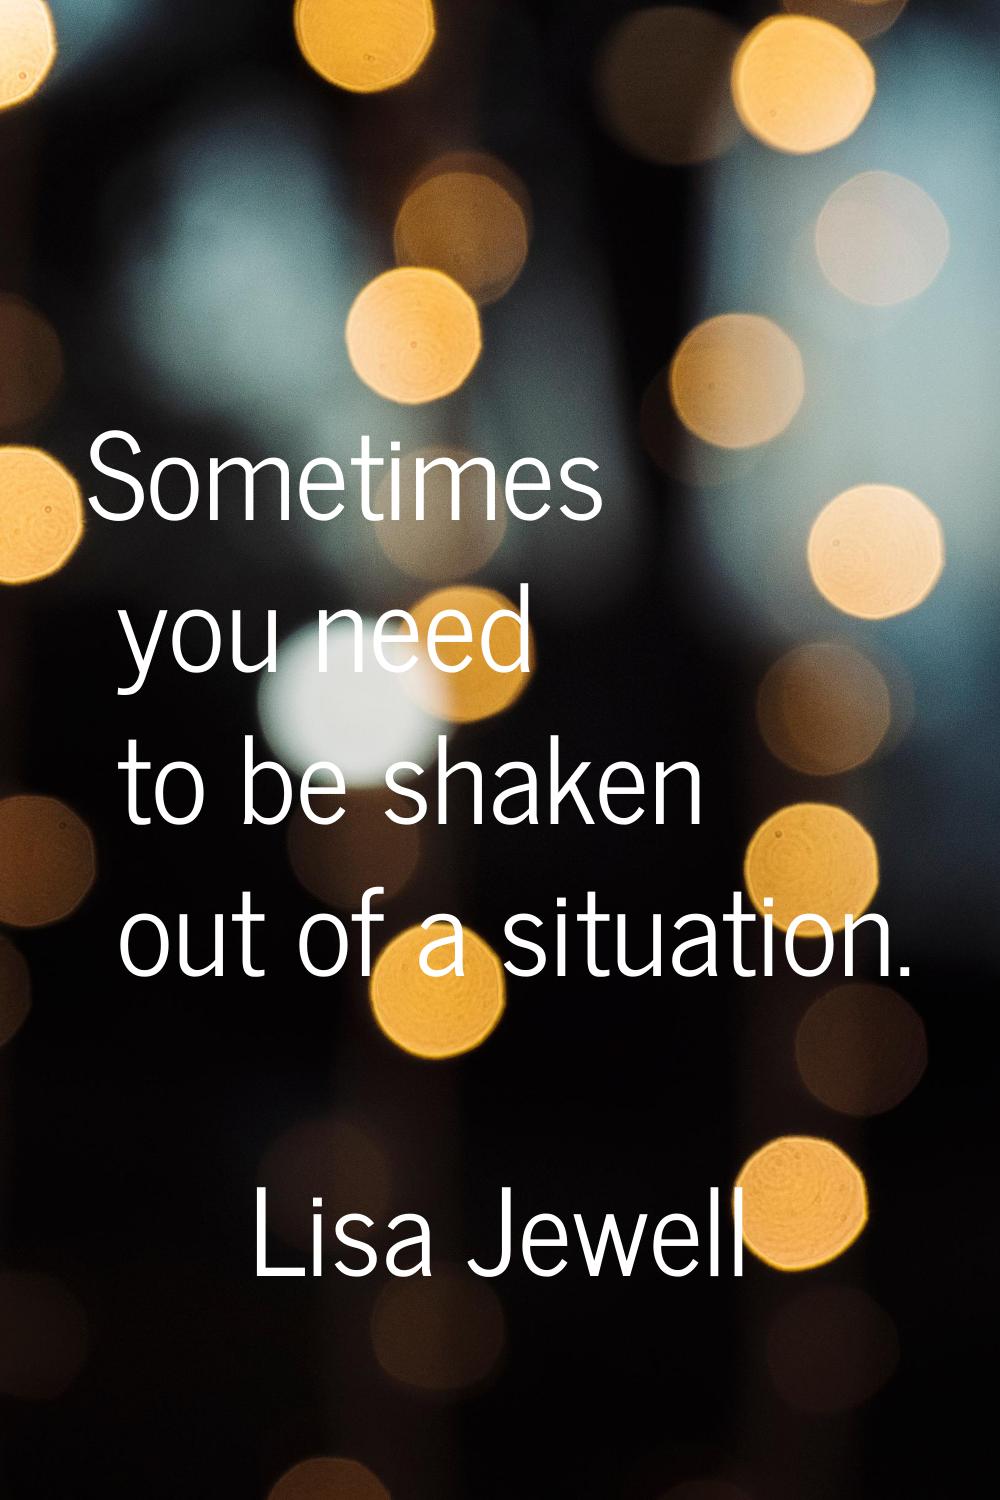 Sometimes you need to be shaken out of a situation.